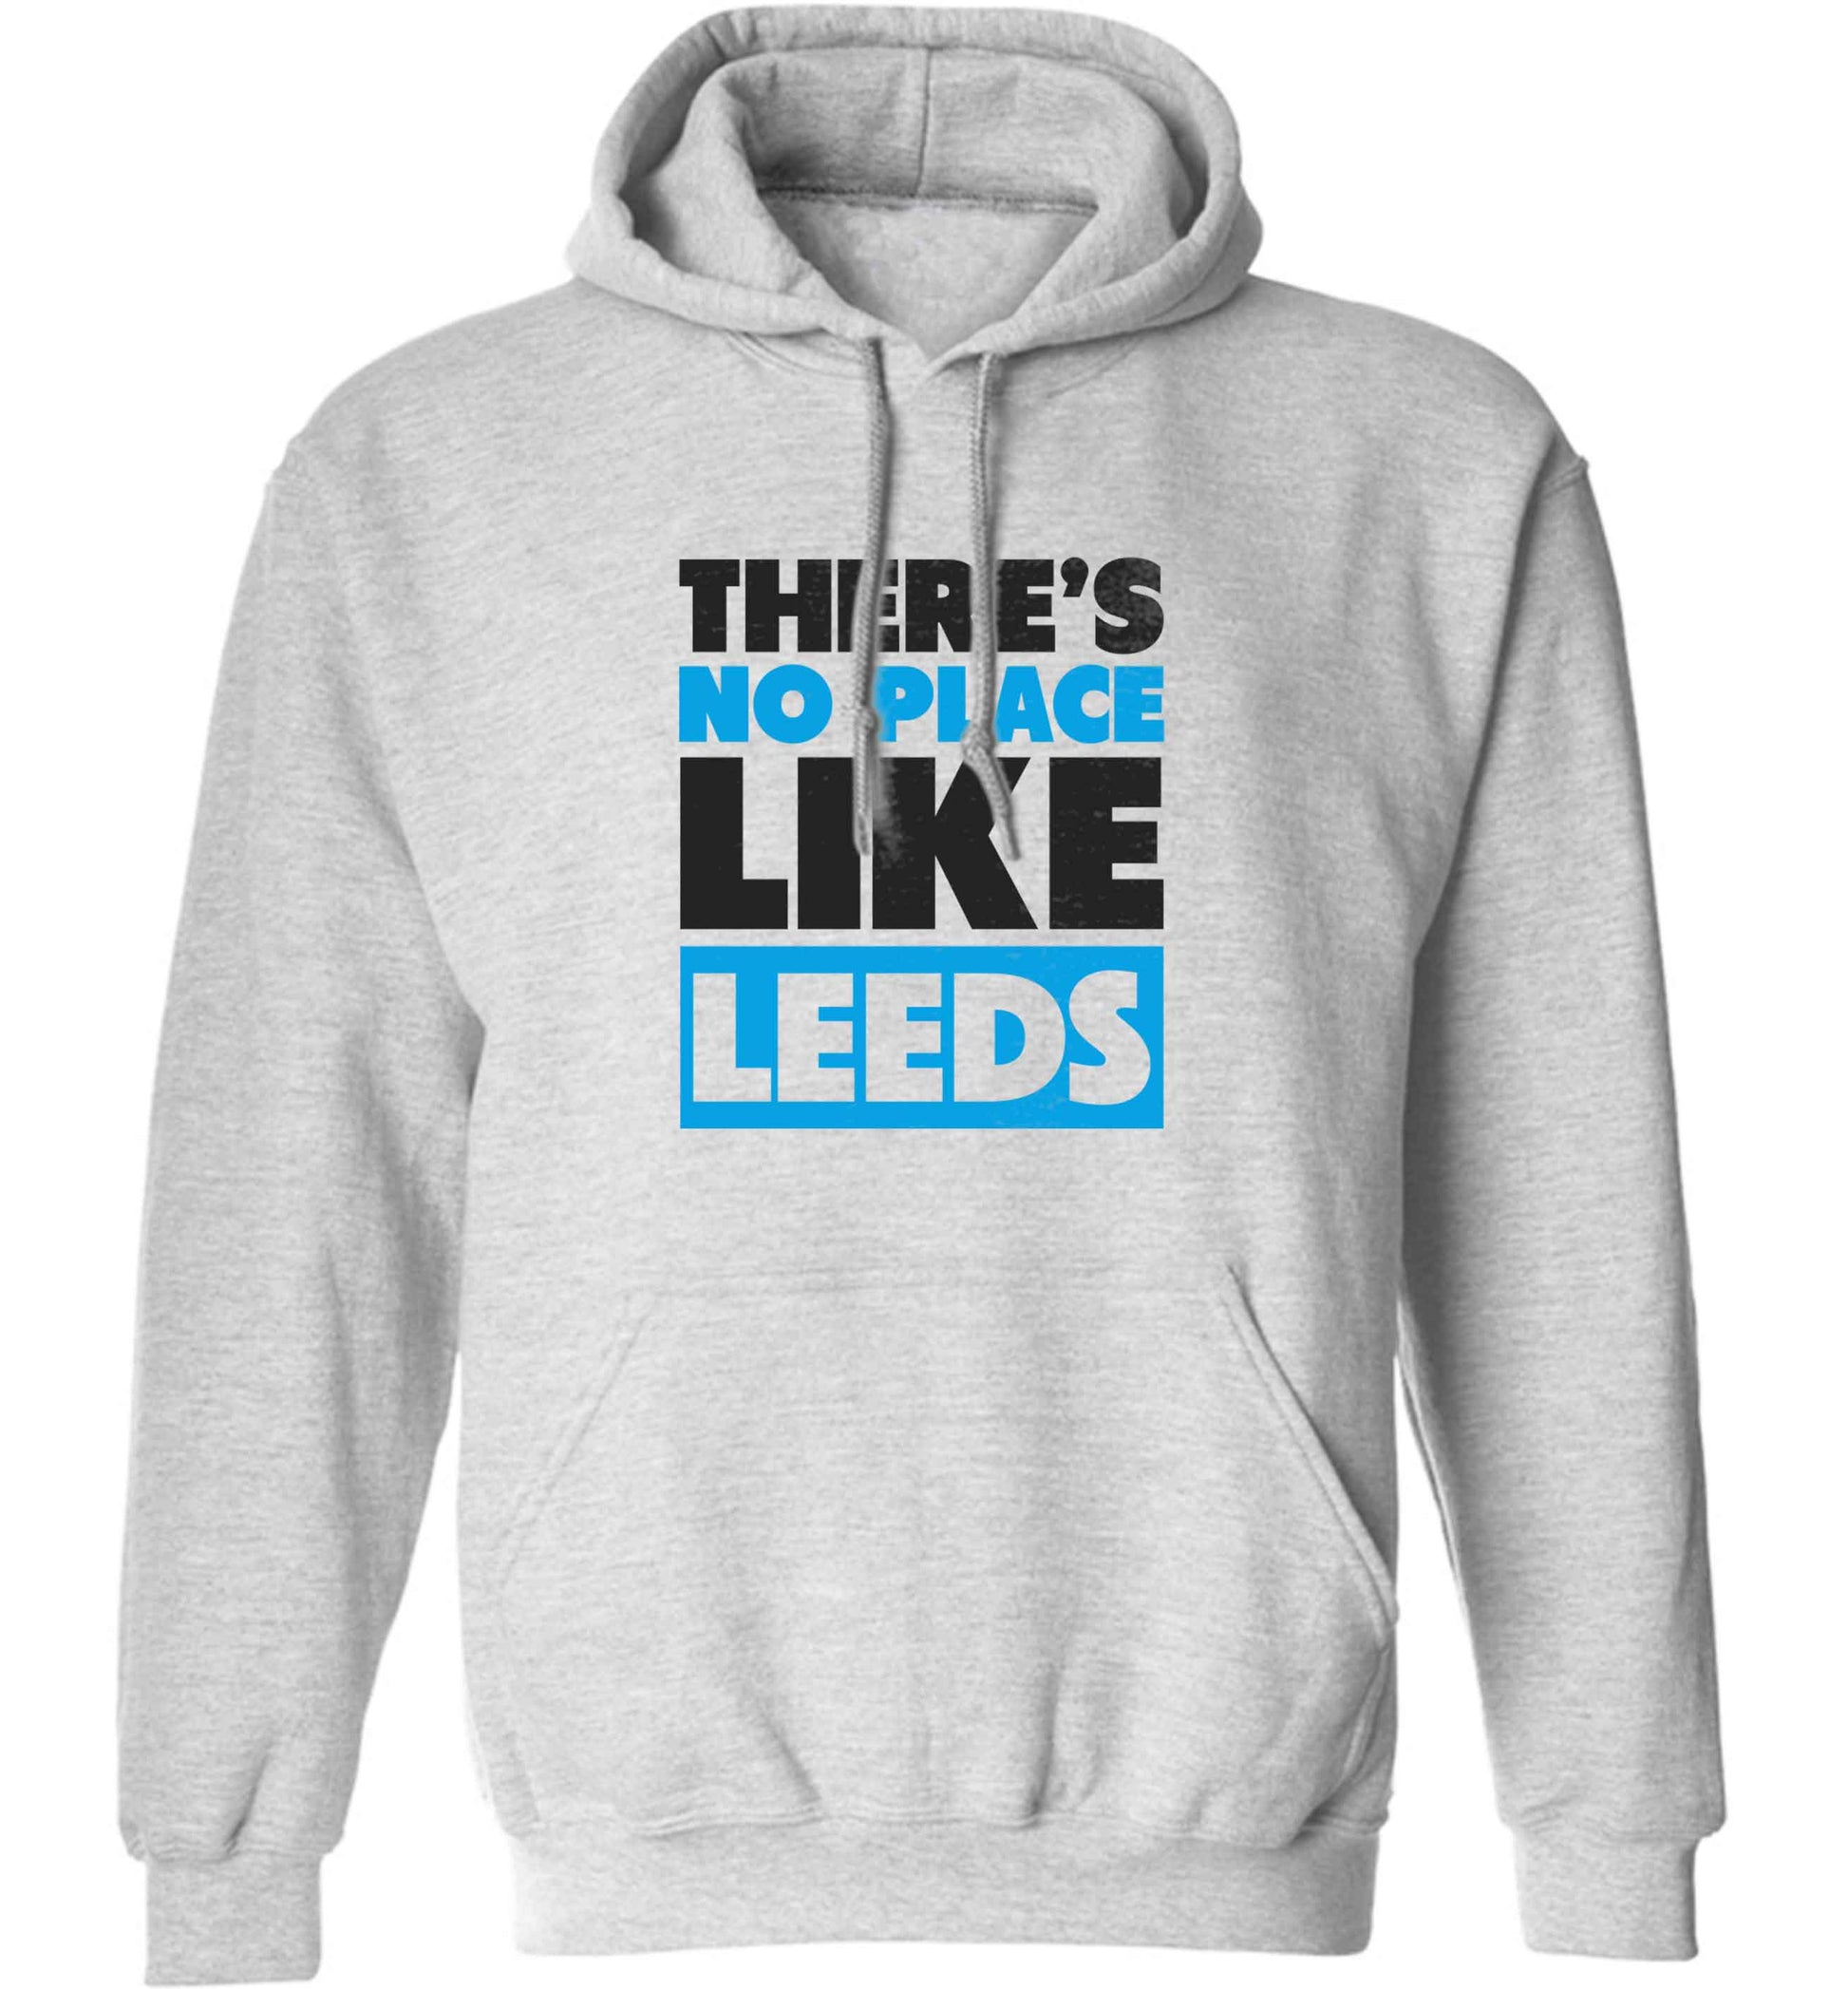 There's no place like Leeds adults unisex grey hoodie 2XL